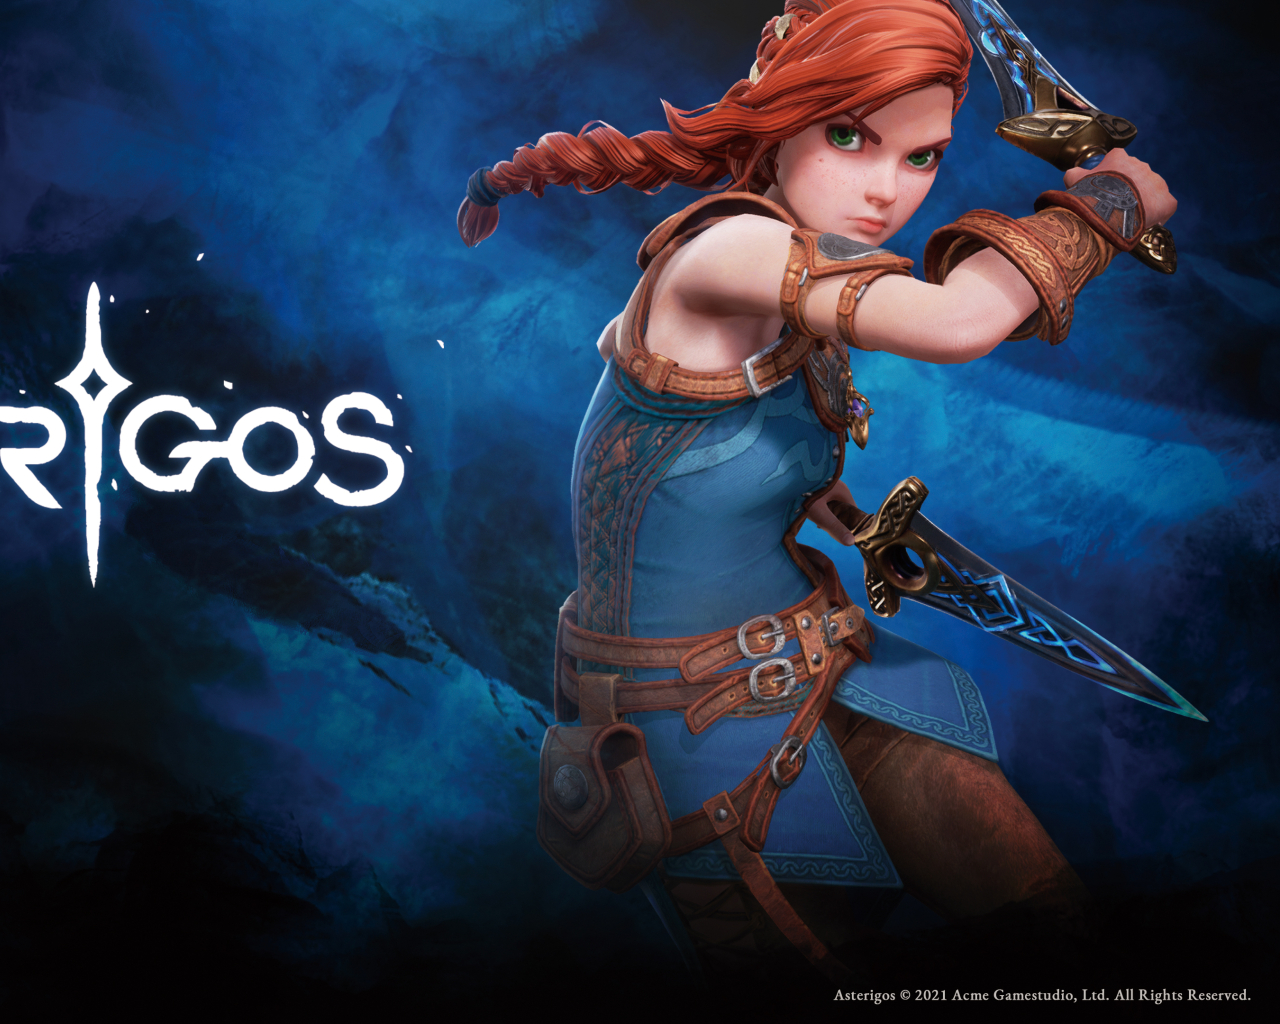 Asterigos: Curse of the Stars free download